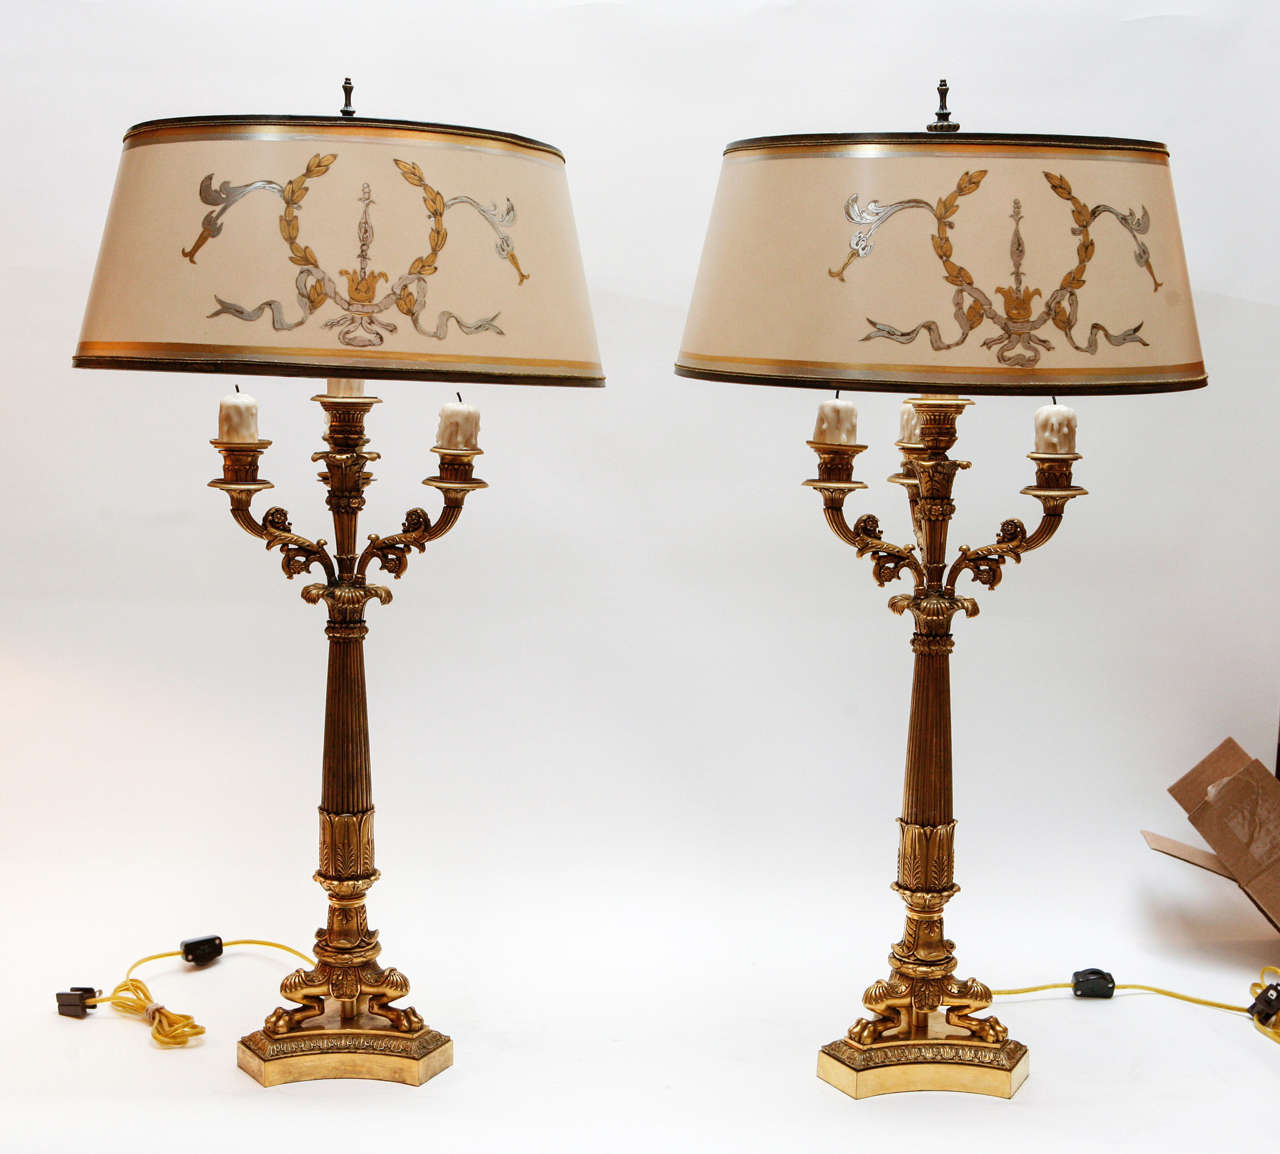 Pair of 19th c. French Empire Dore Bronze Candelabras converted to lamps. They are very finely chased. The Shades are included and are Hand Made of Parchment Paper. They are Hand Gilded and Decorated. The lamps have been newly wired. The measurement